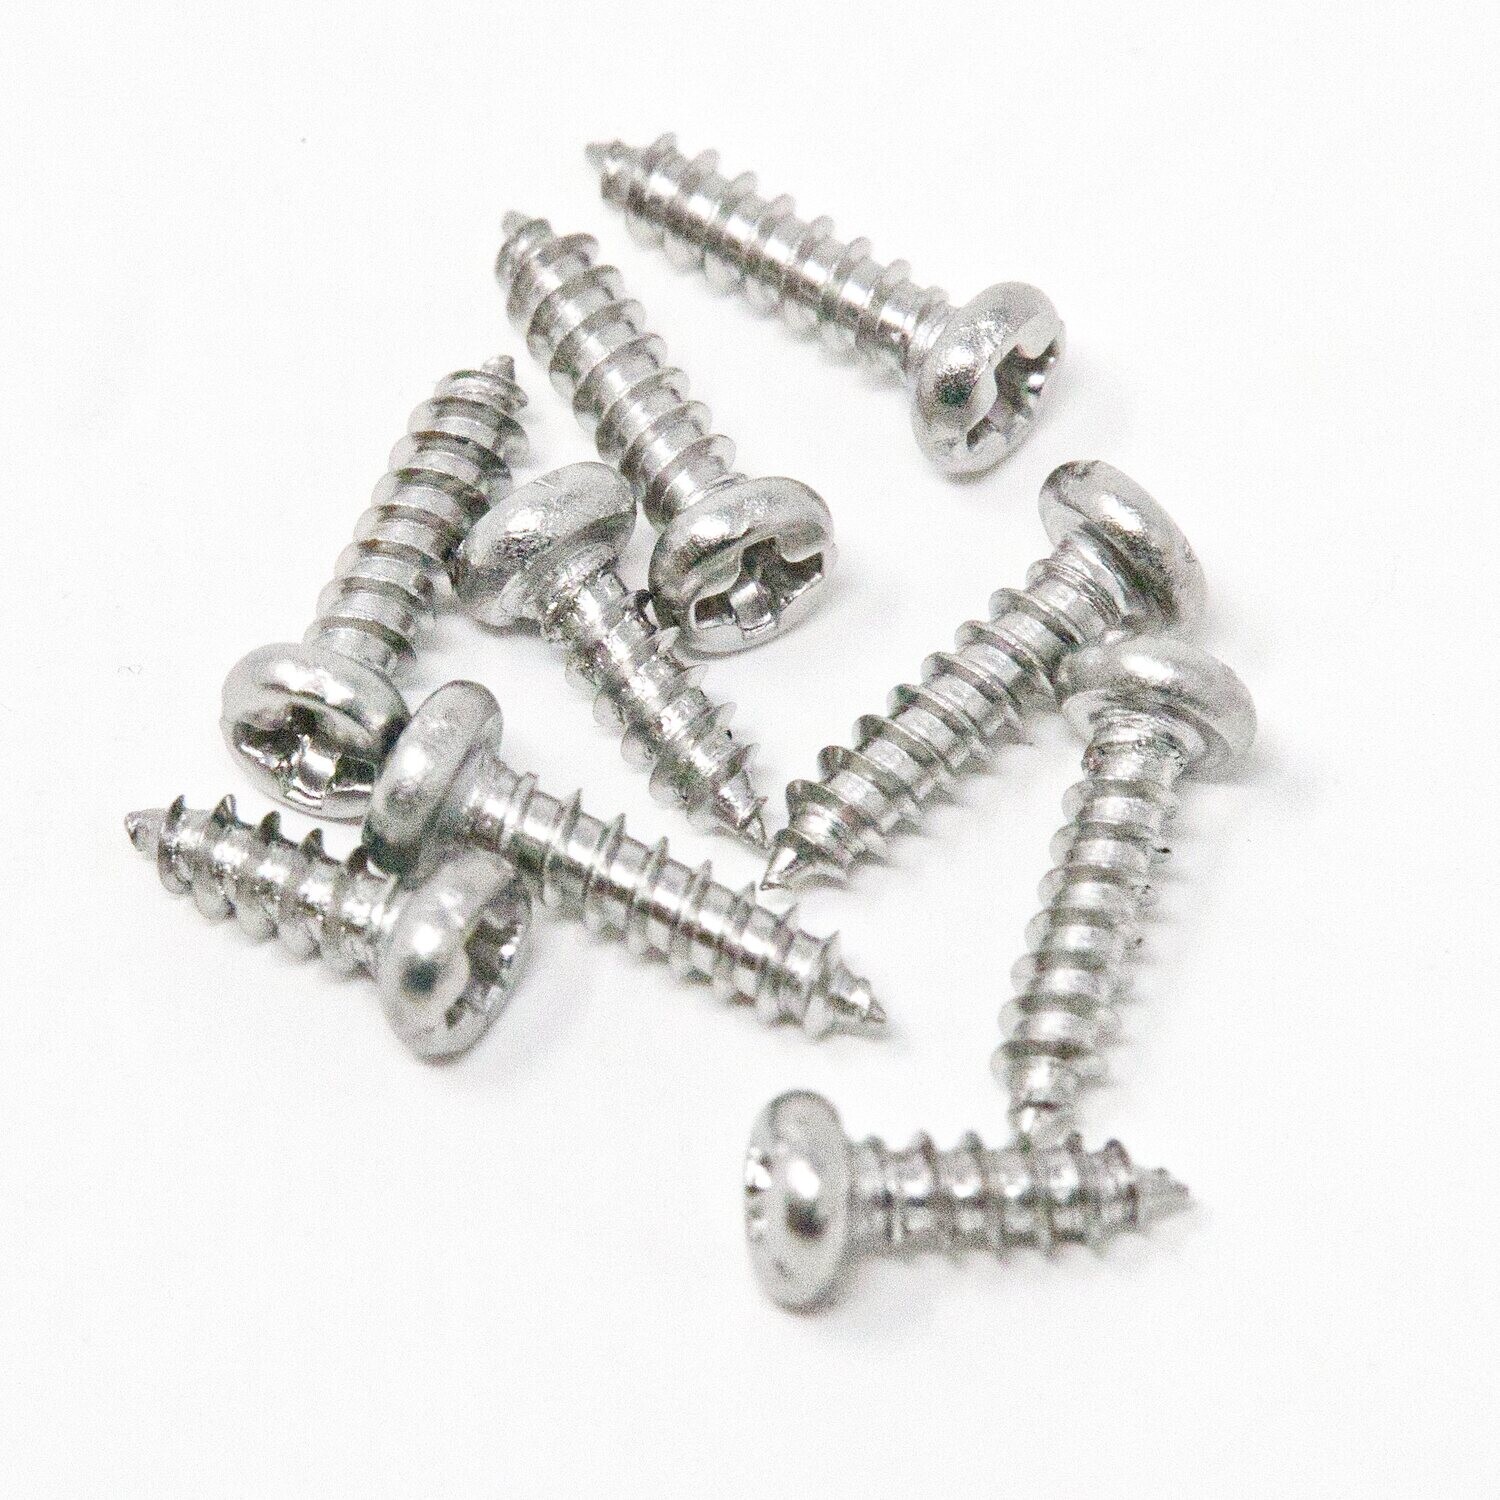 Game Boy Color Stainless Steel Screws